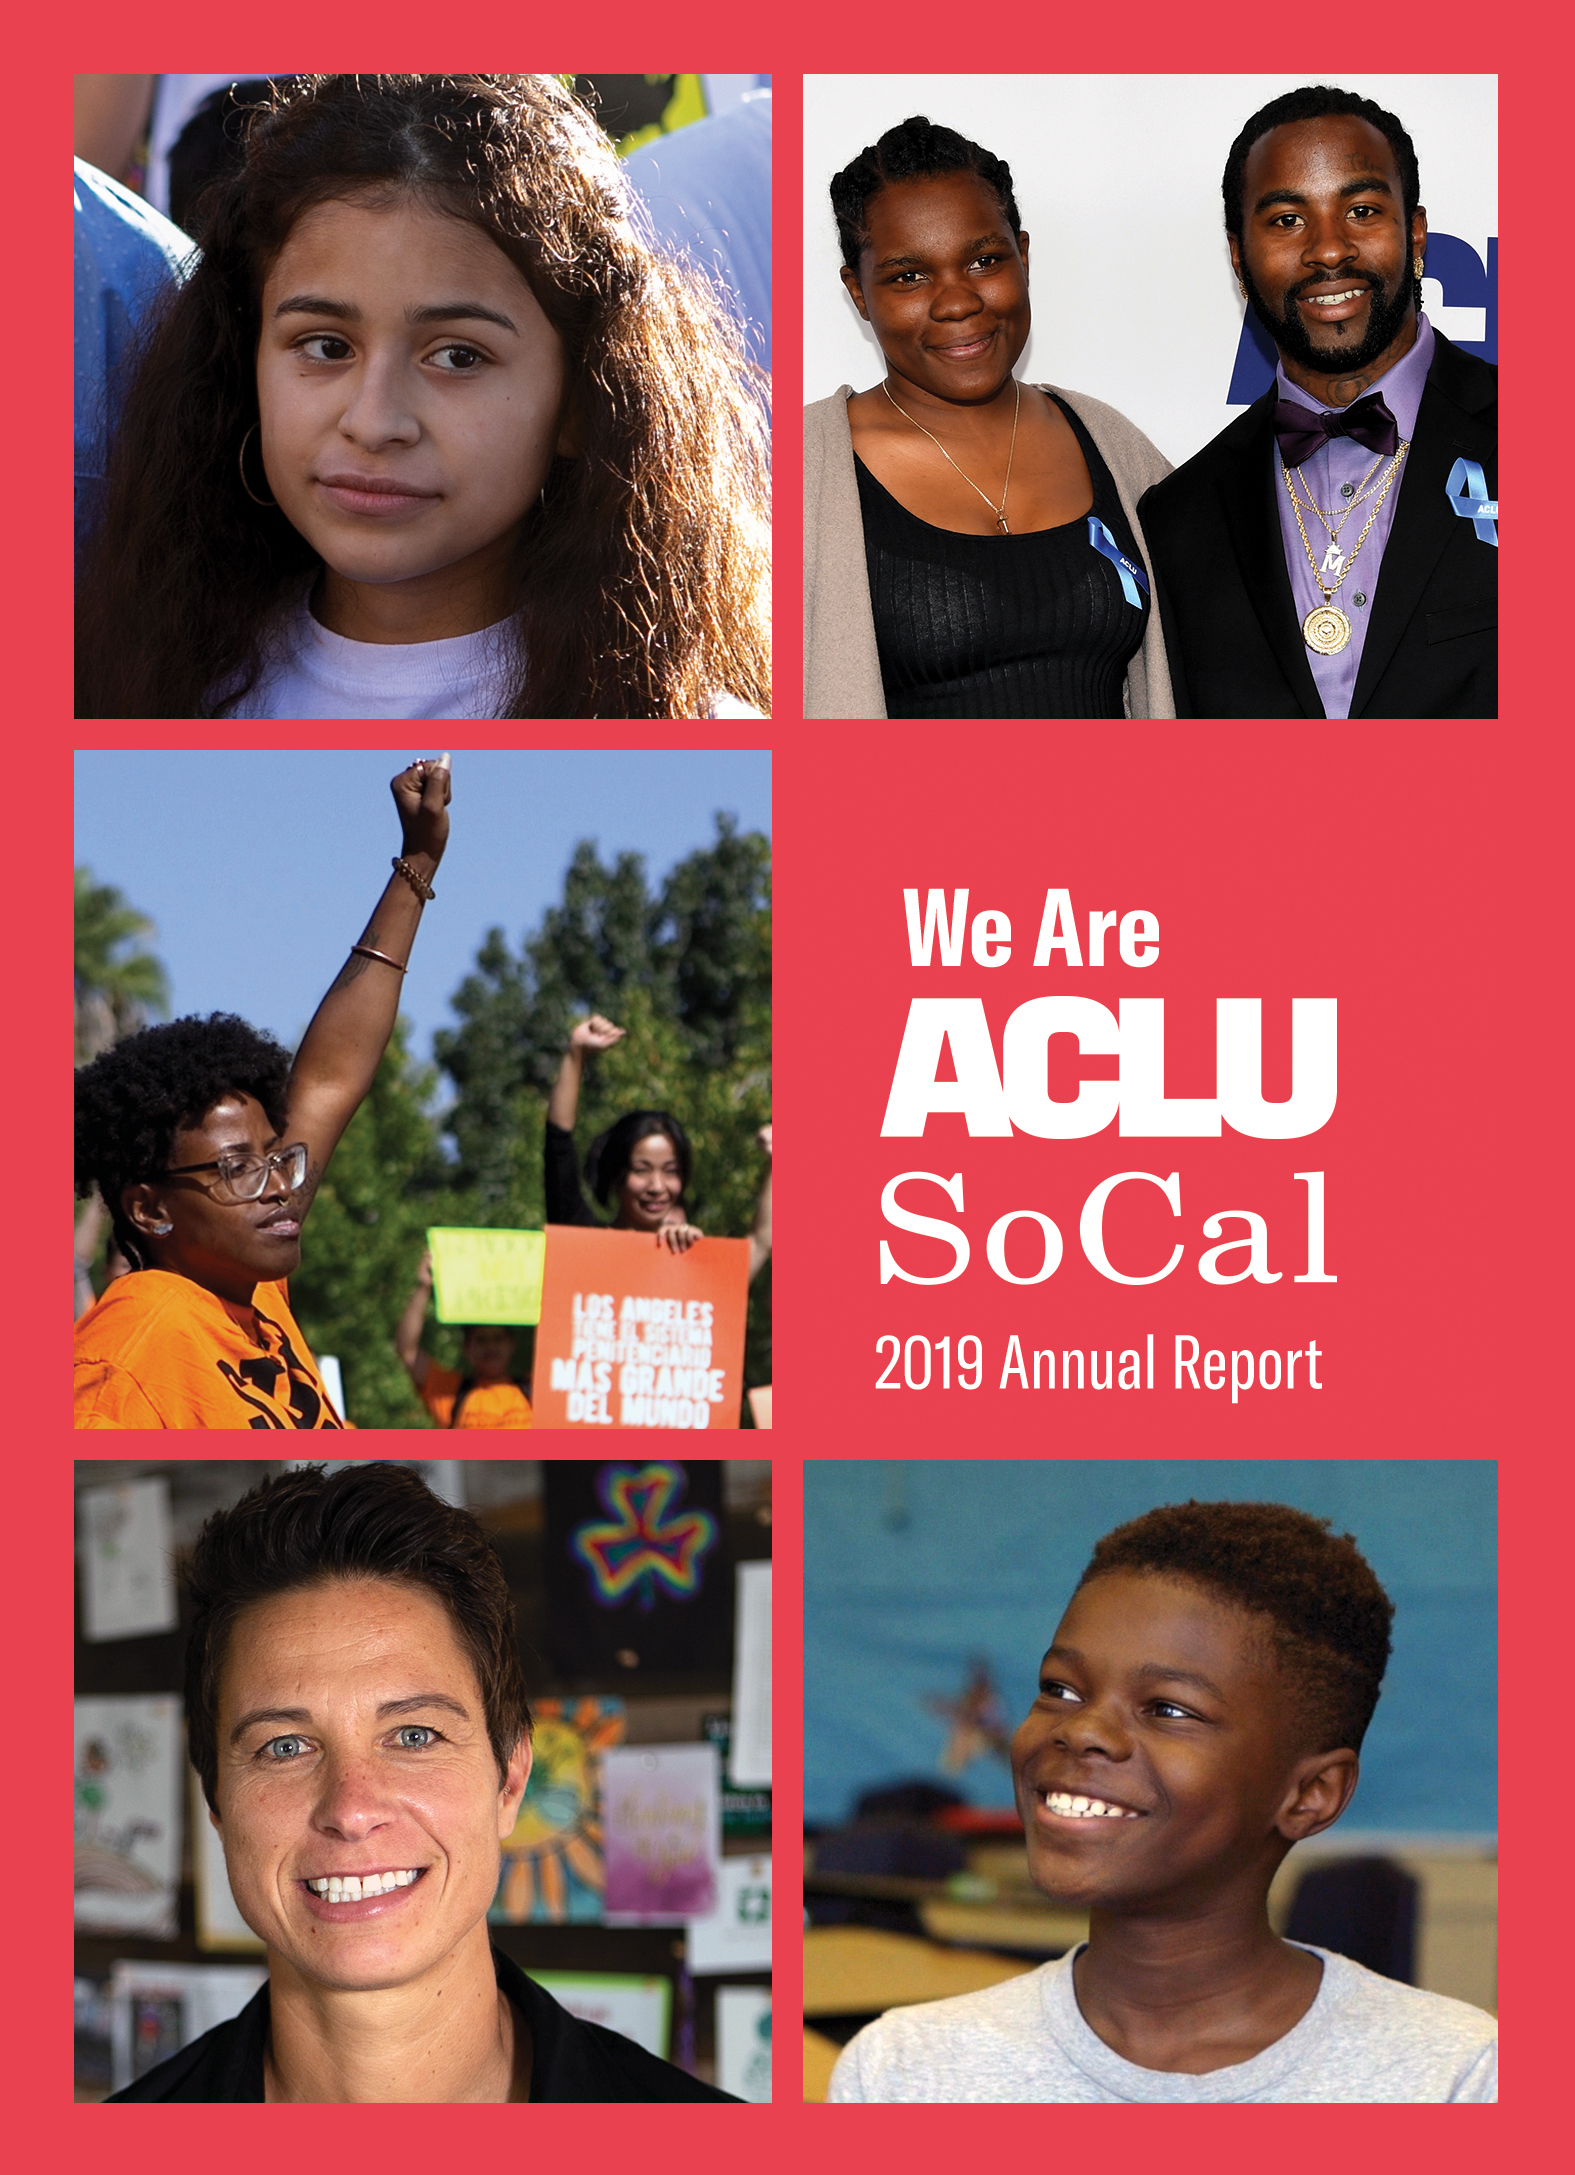 Photos from left to right, top to bottom: A young girl, a woman and a man at an awards ceremony, a woman at a protest rally holding up her fist, a woman smiling into the camera, a young boy smiling and looking off camera. We Are ACLU SoCal 2019 Annual Rep